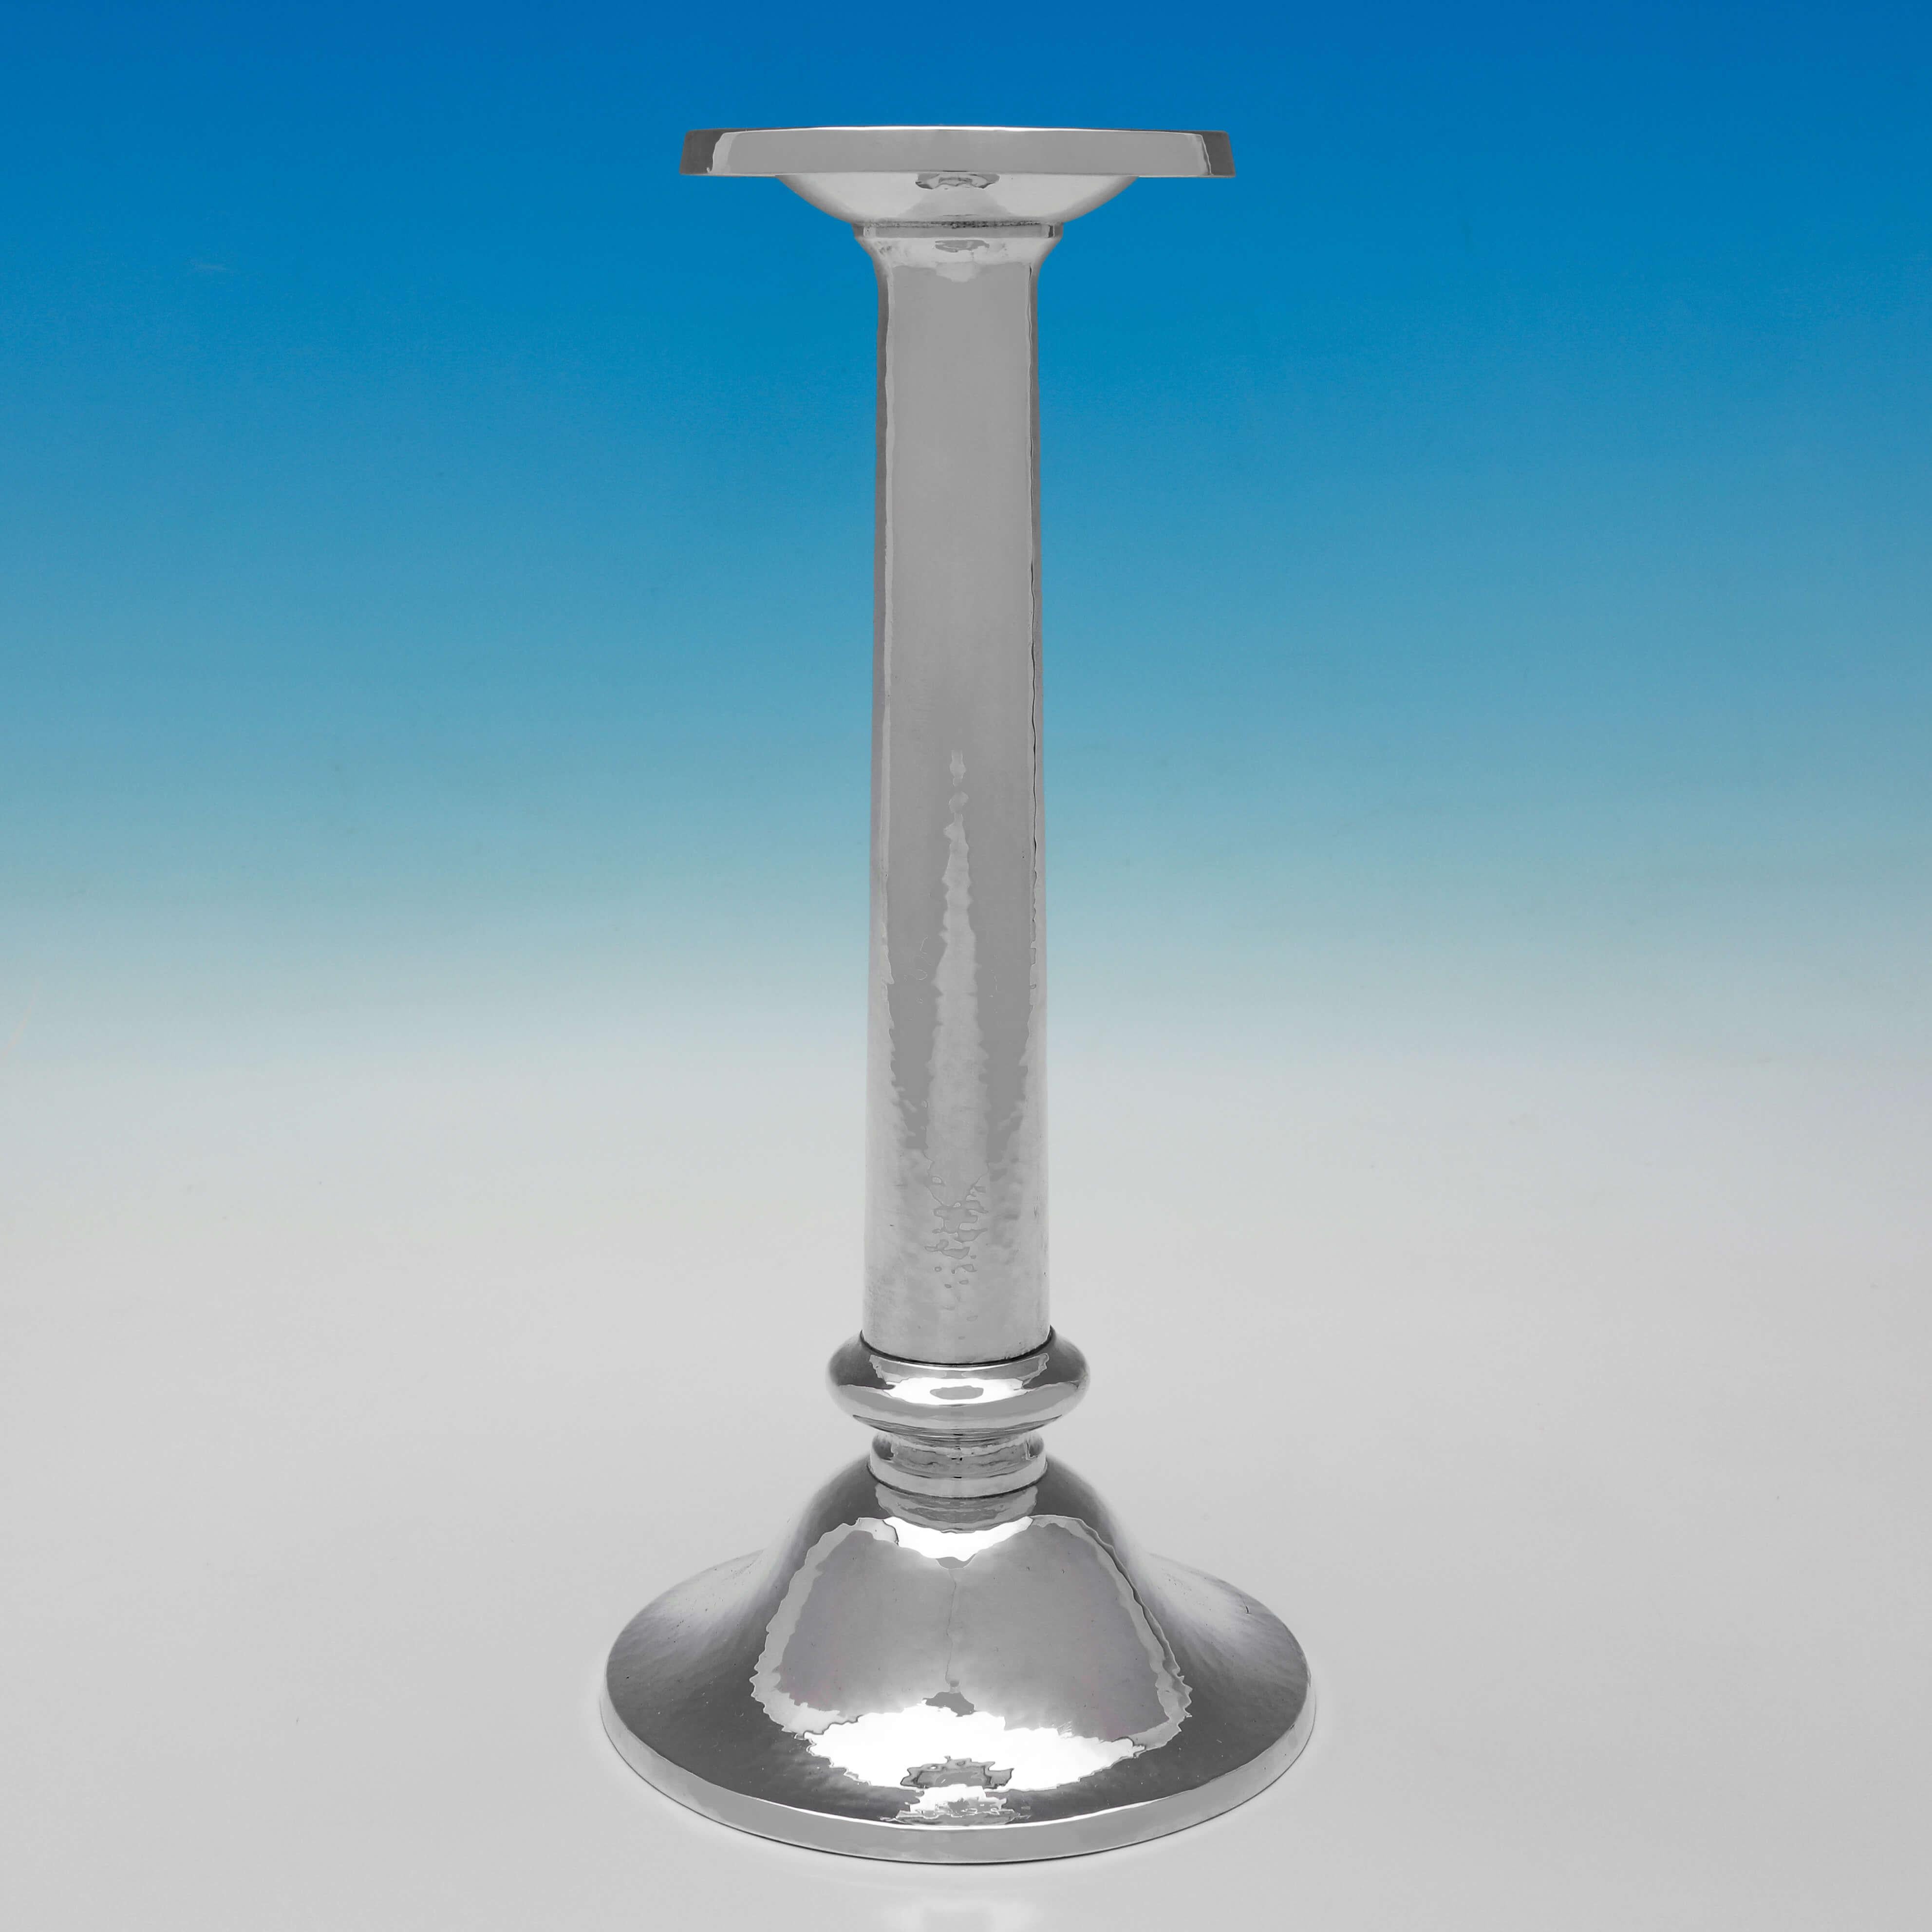 Made circa 1930 by Shreve and Co. of San Francisco, this very handsome, Art Deco Period, set of 4 Sterling Silver Candlesticks, feature a hammered finish and are incredibly stylish. 

Each candlestick measures 10